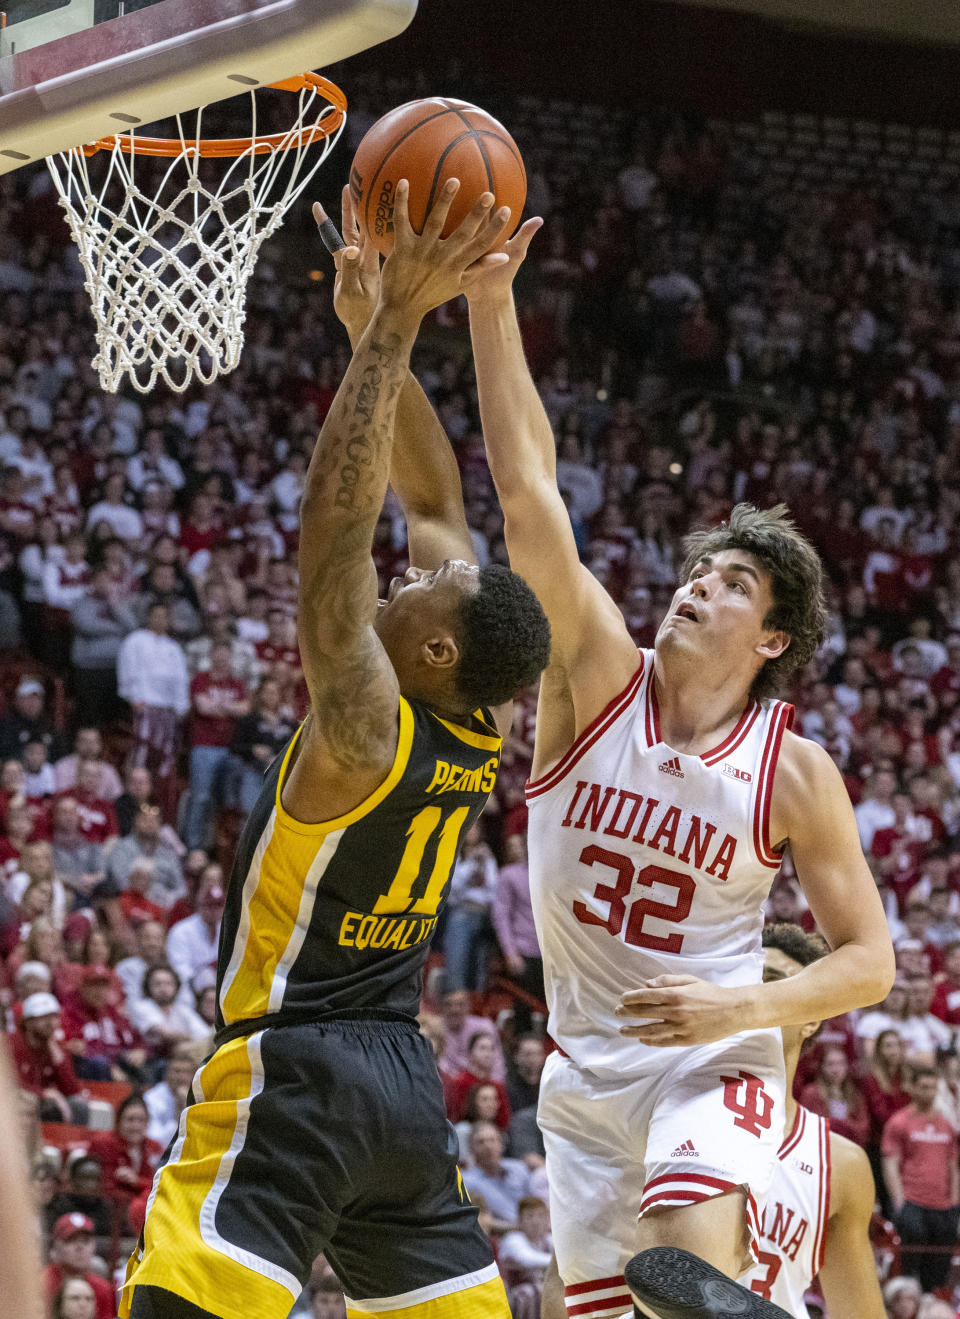 Iowa guard Tony Perkins (11) shoots against Indiana guard Trey Galloway (32) during the first half of an NCAA college basketball game Tuesday, Feb. 28, 2023, in Bloomington, Ind. (AP Photo/Doug McSchooler)